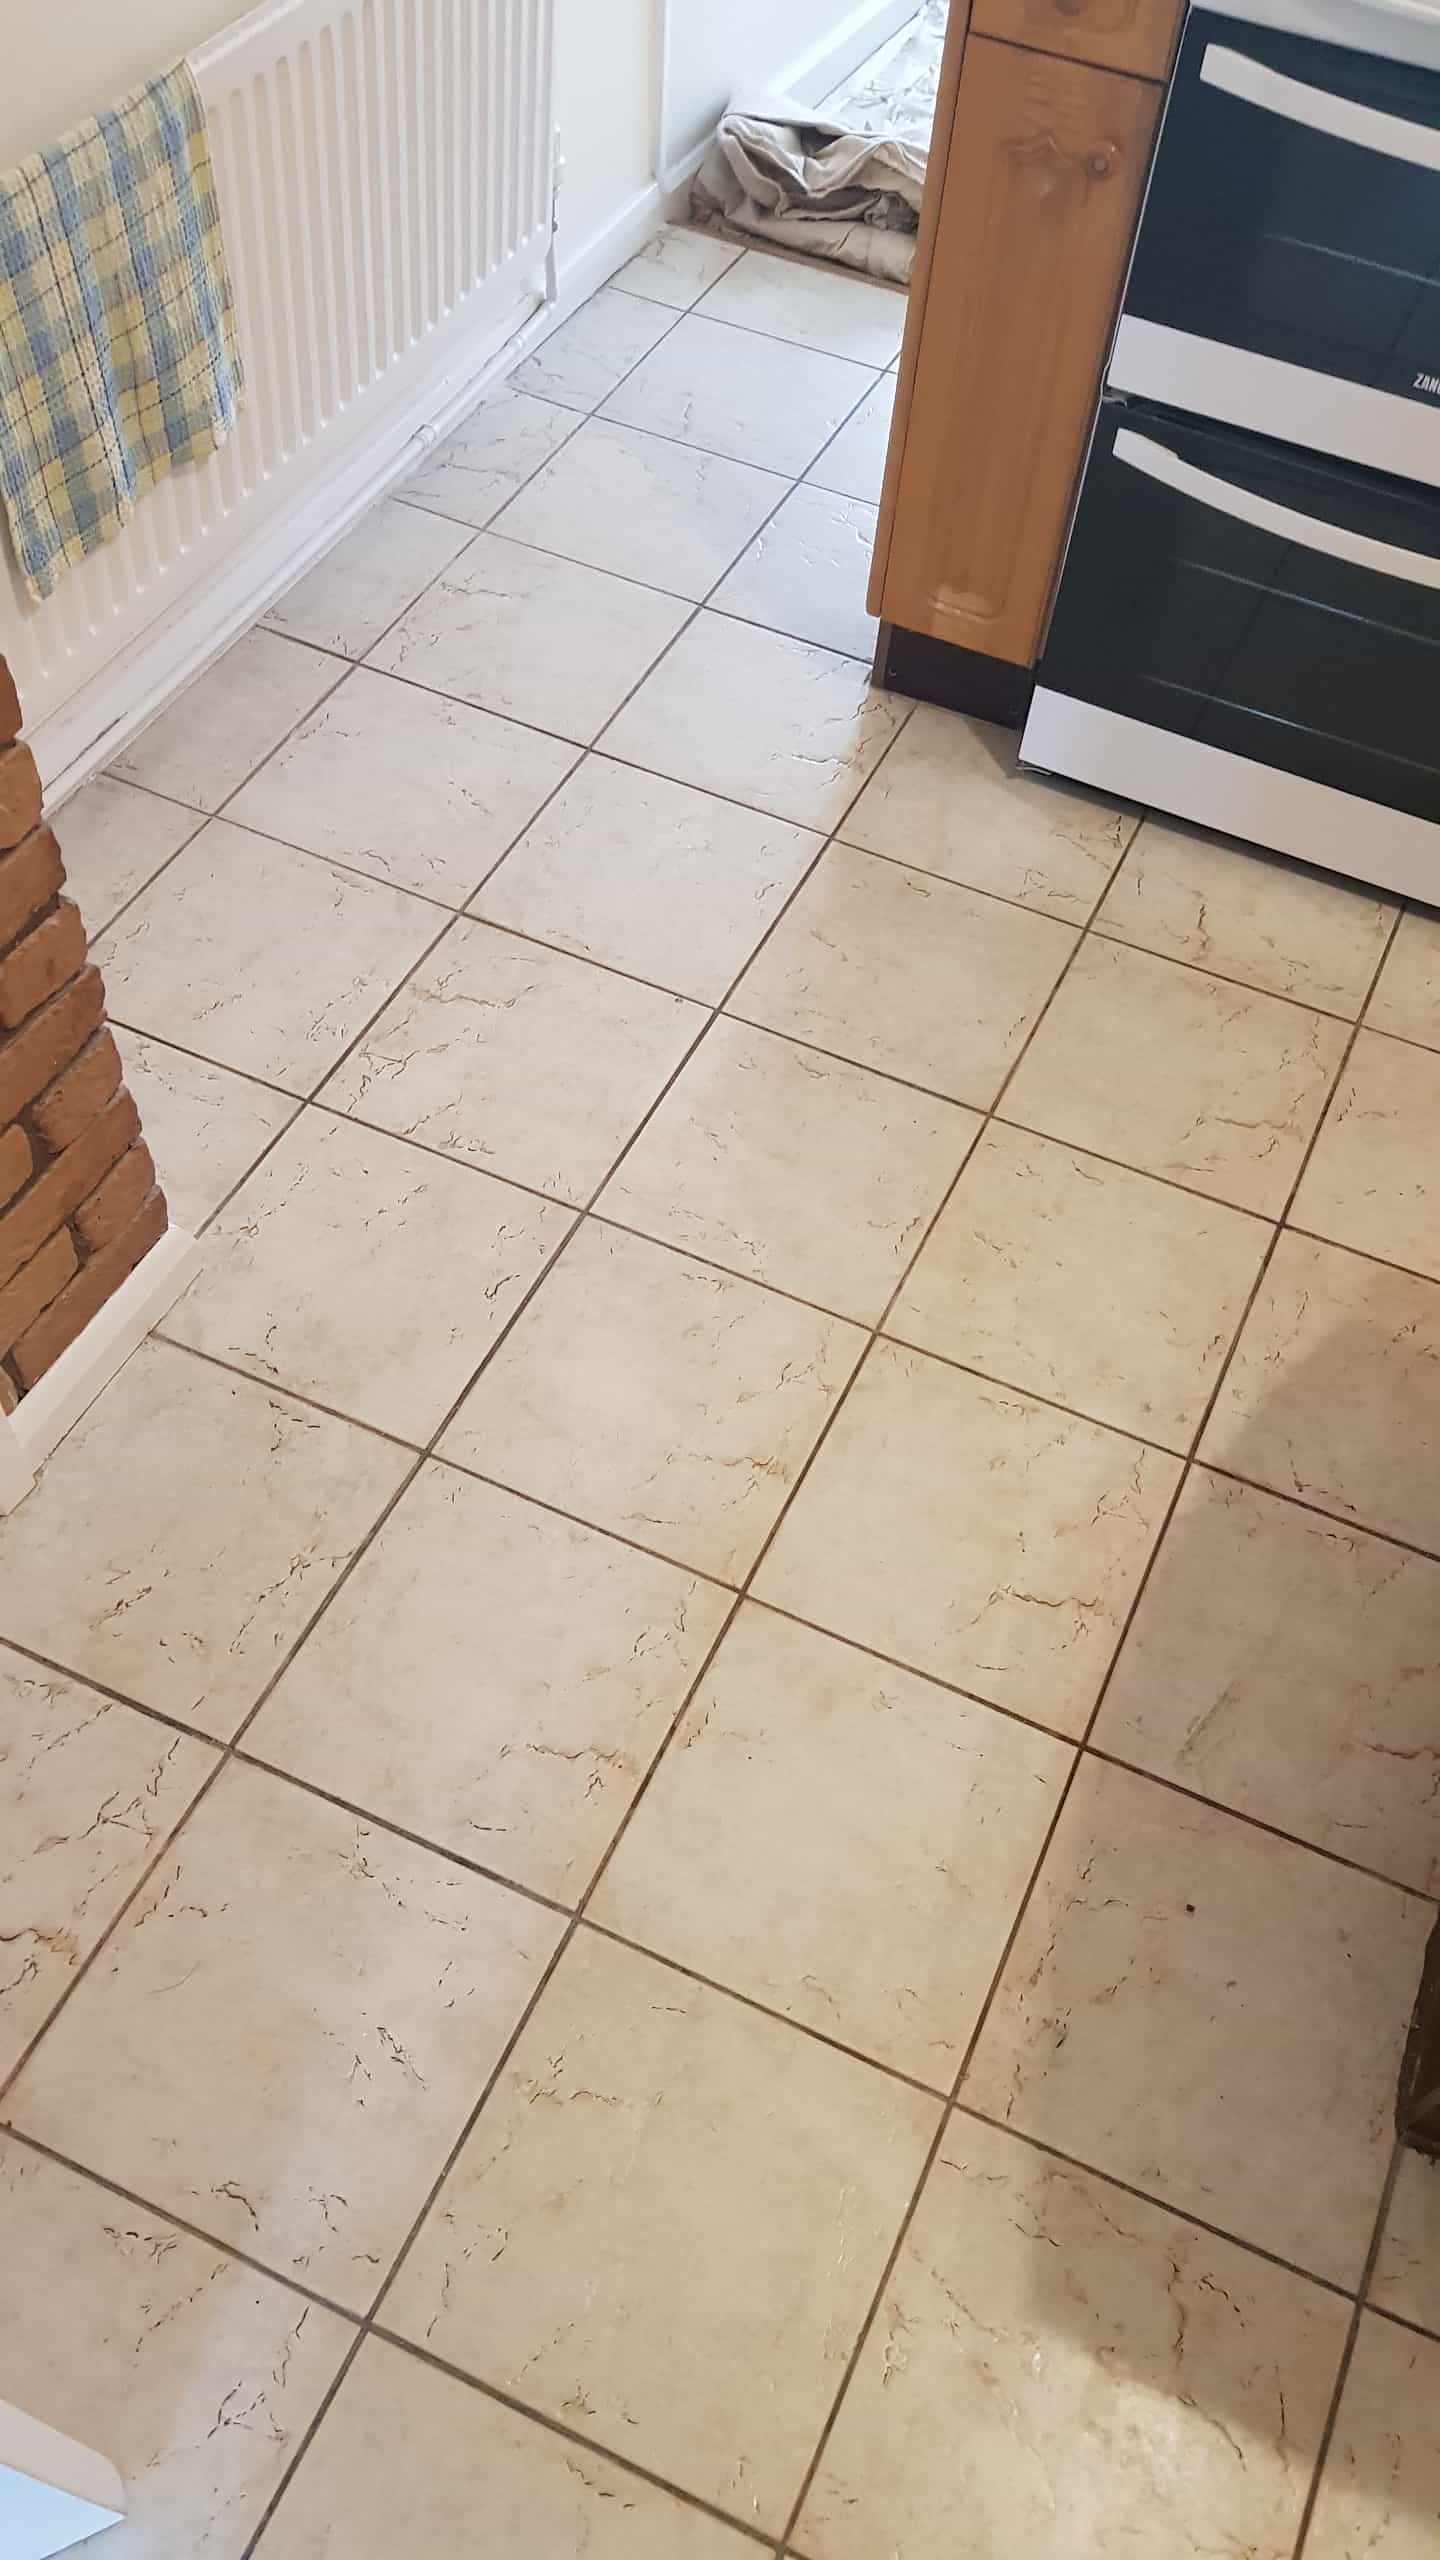 Textured Ceramic Tile Barnsley Before Cleaning